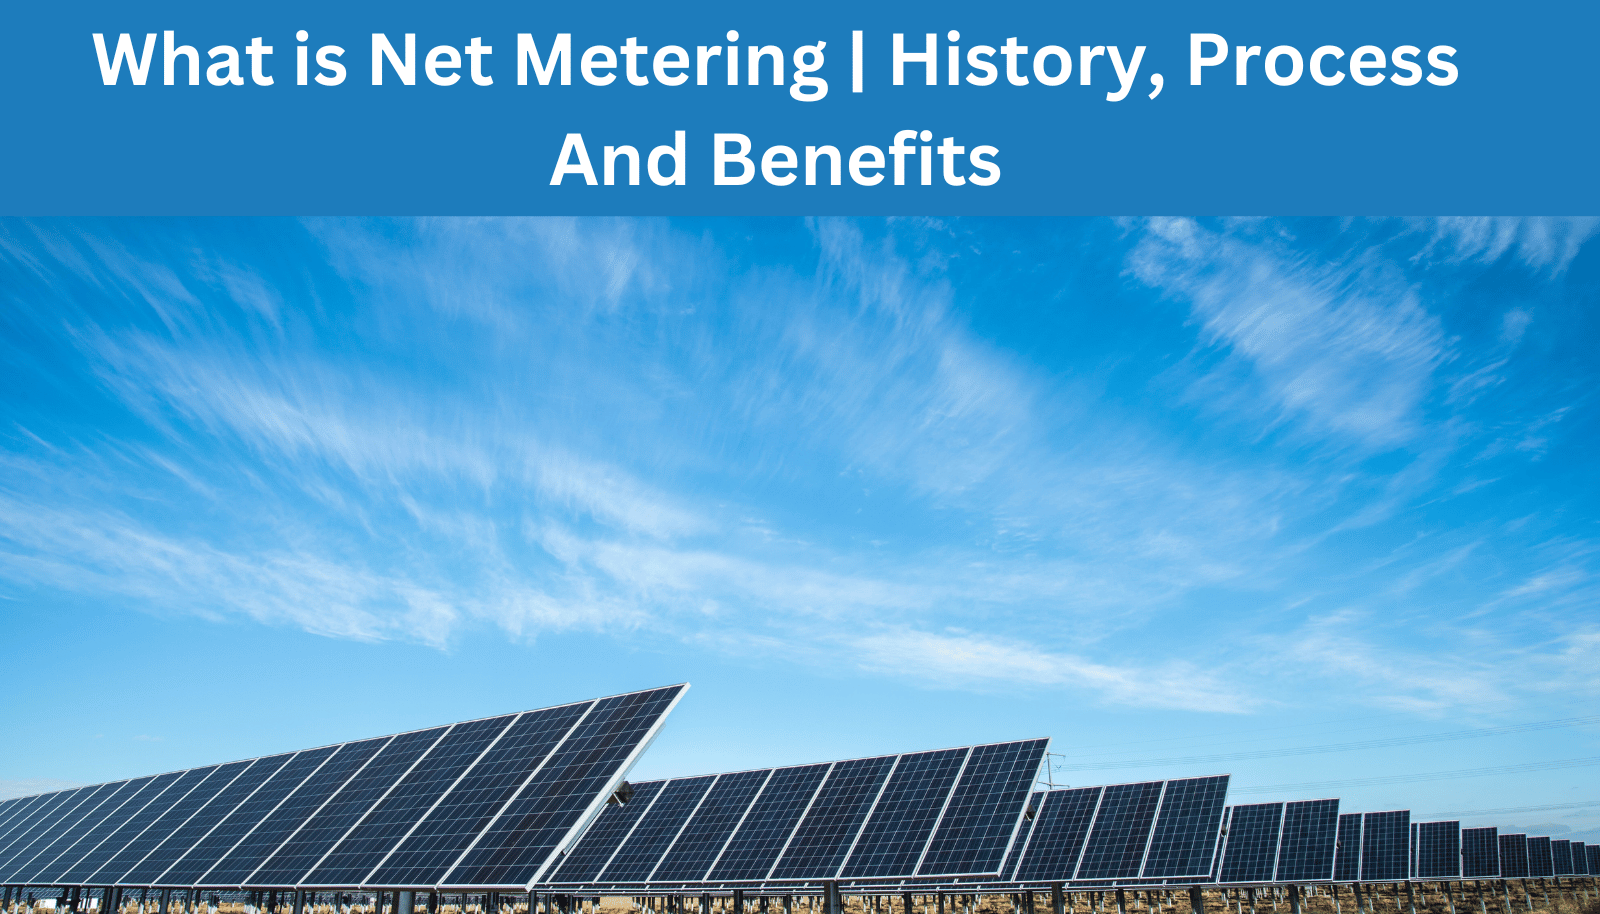 net metering is process which provides and simplify the process of saving electricity